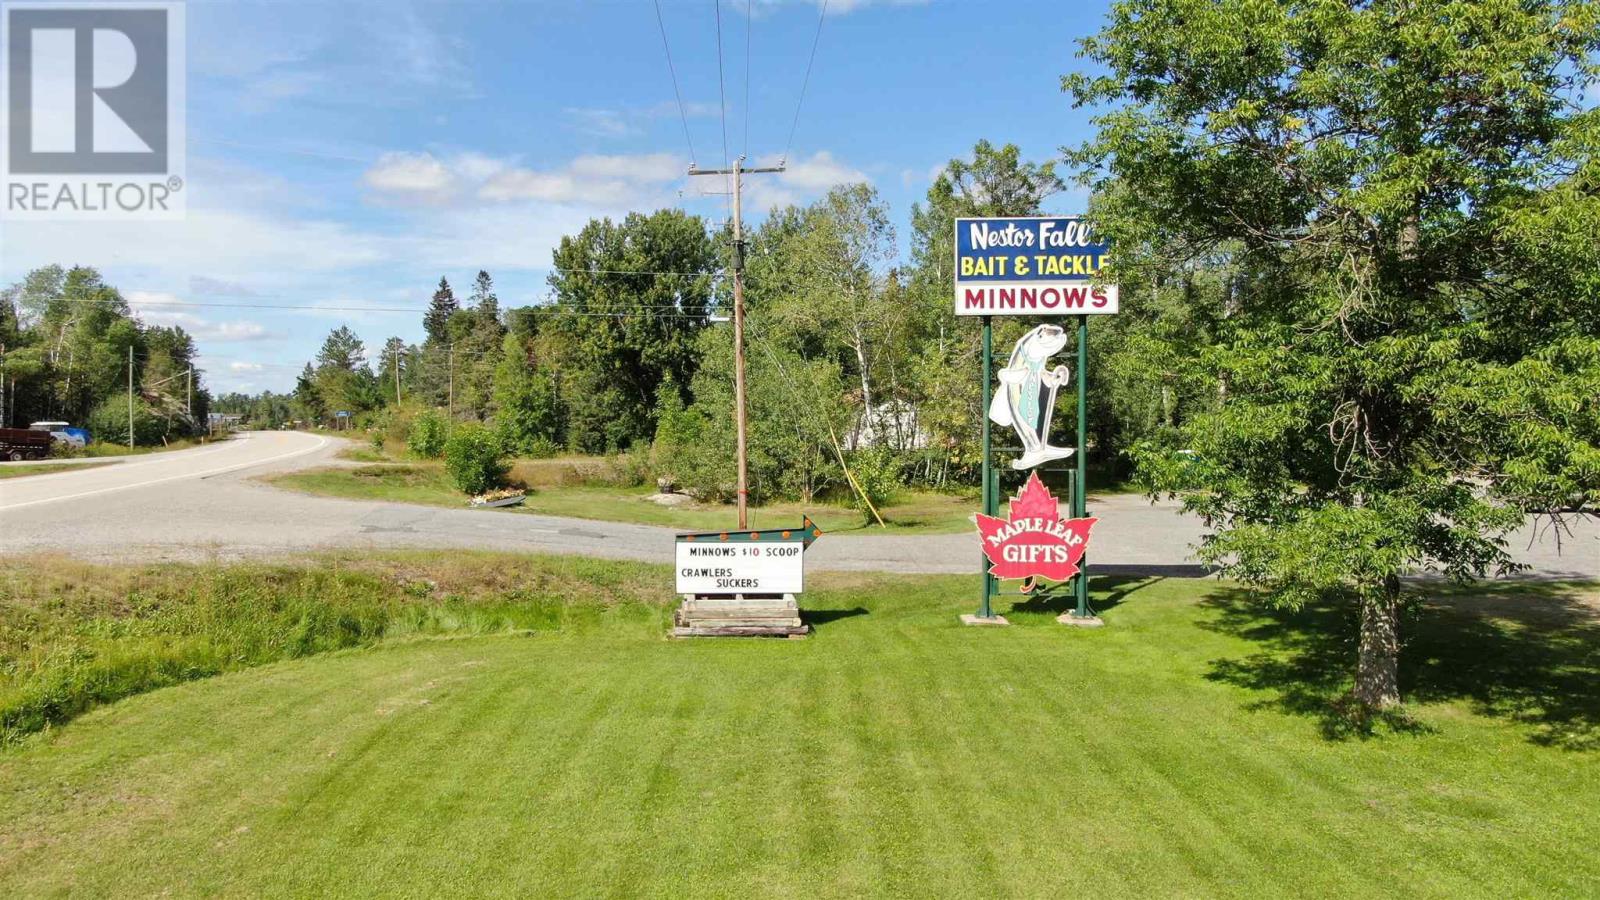 For sale: 1 Bait and Tackle RD, Nestor Falls, Ontario P0X1K0